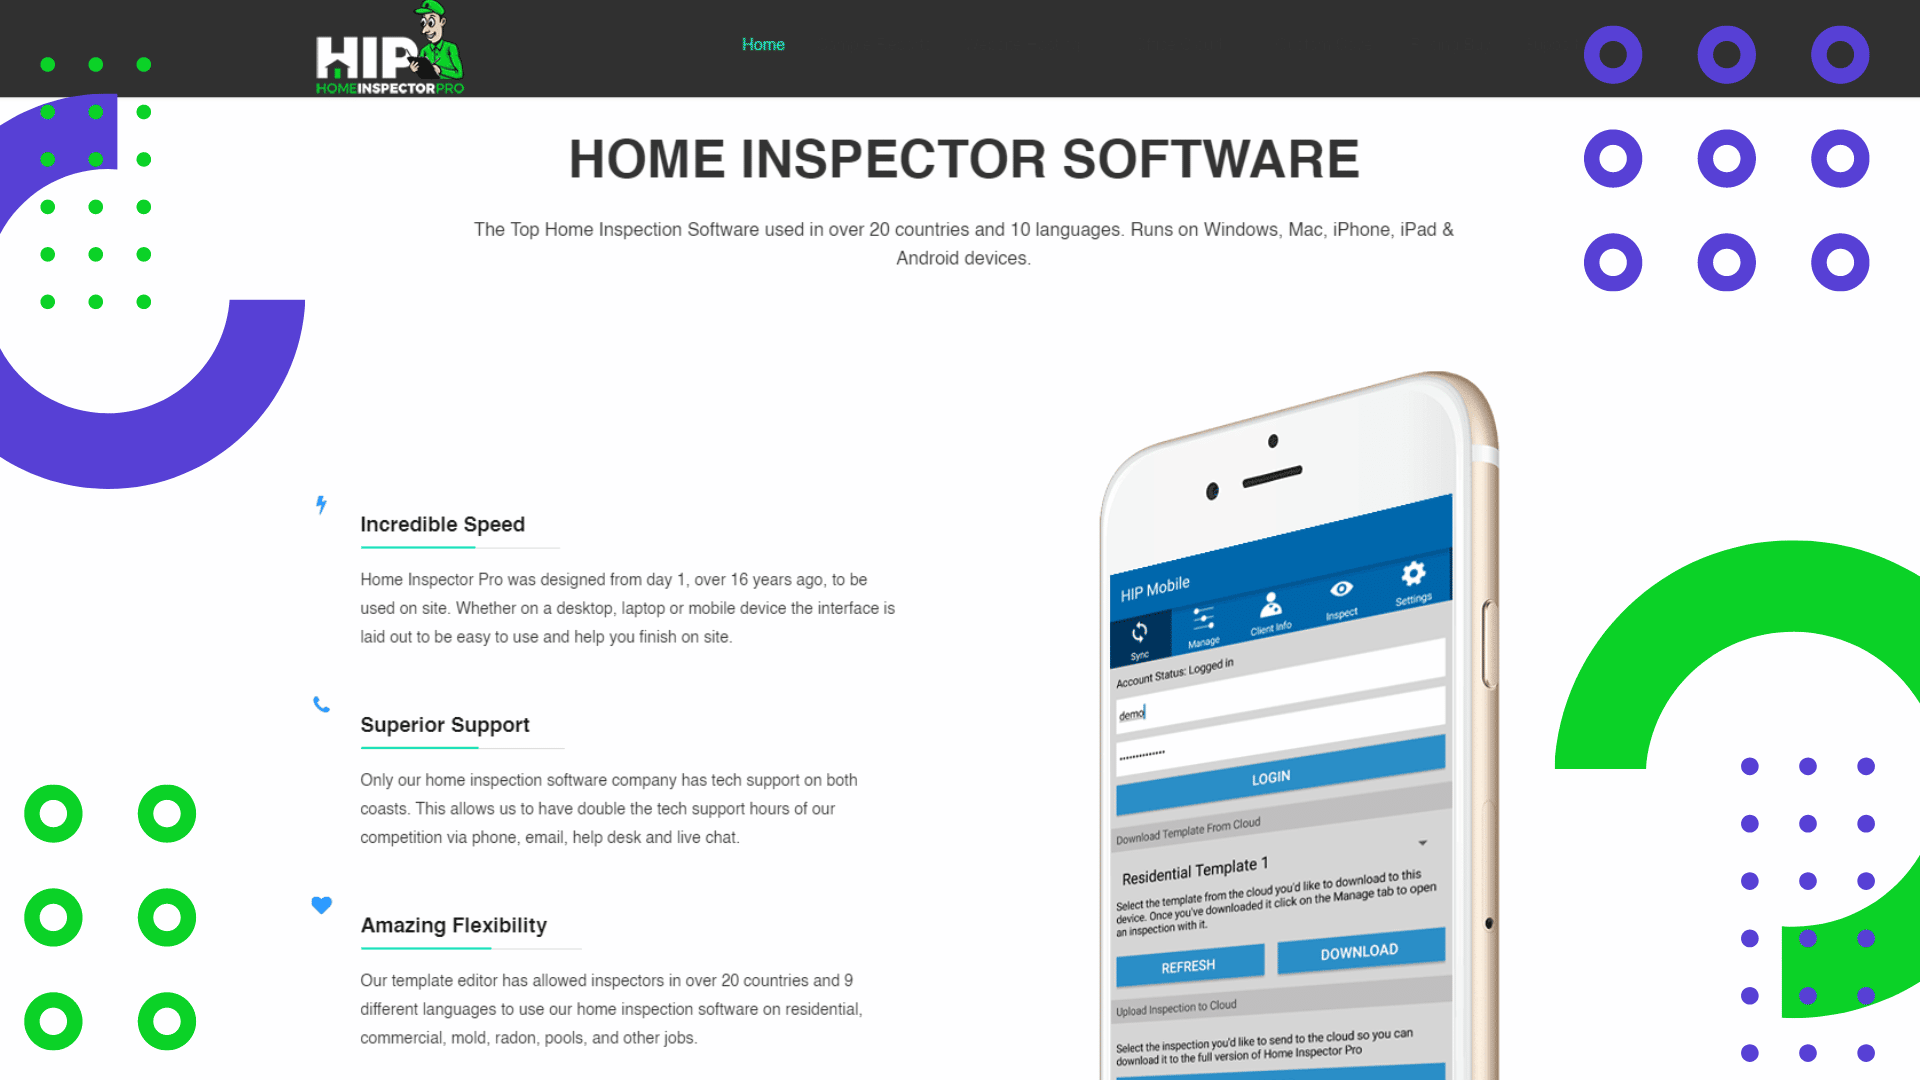 Home Inspector Pro Features